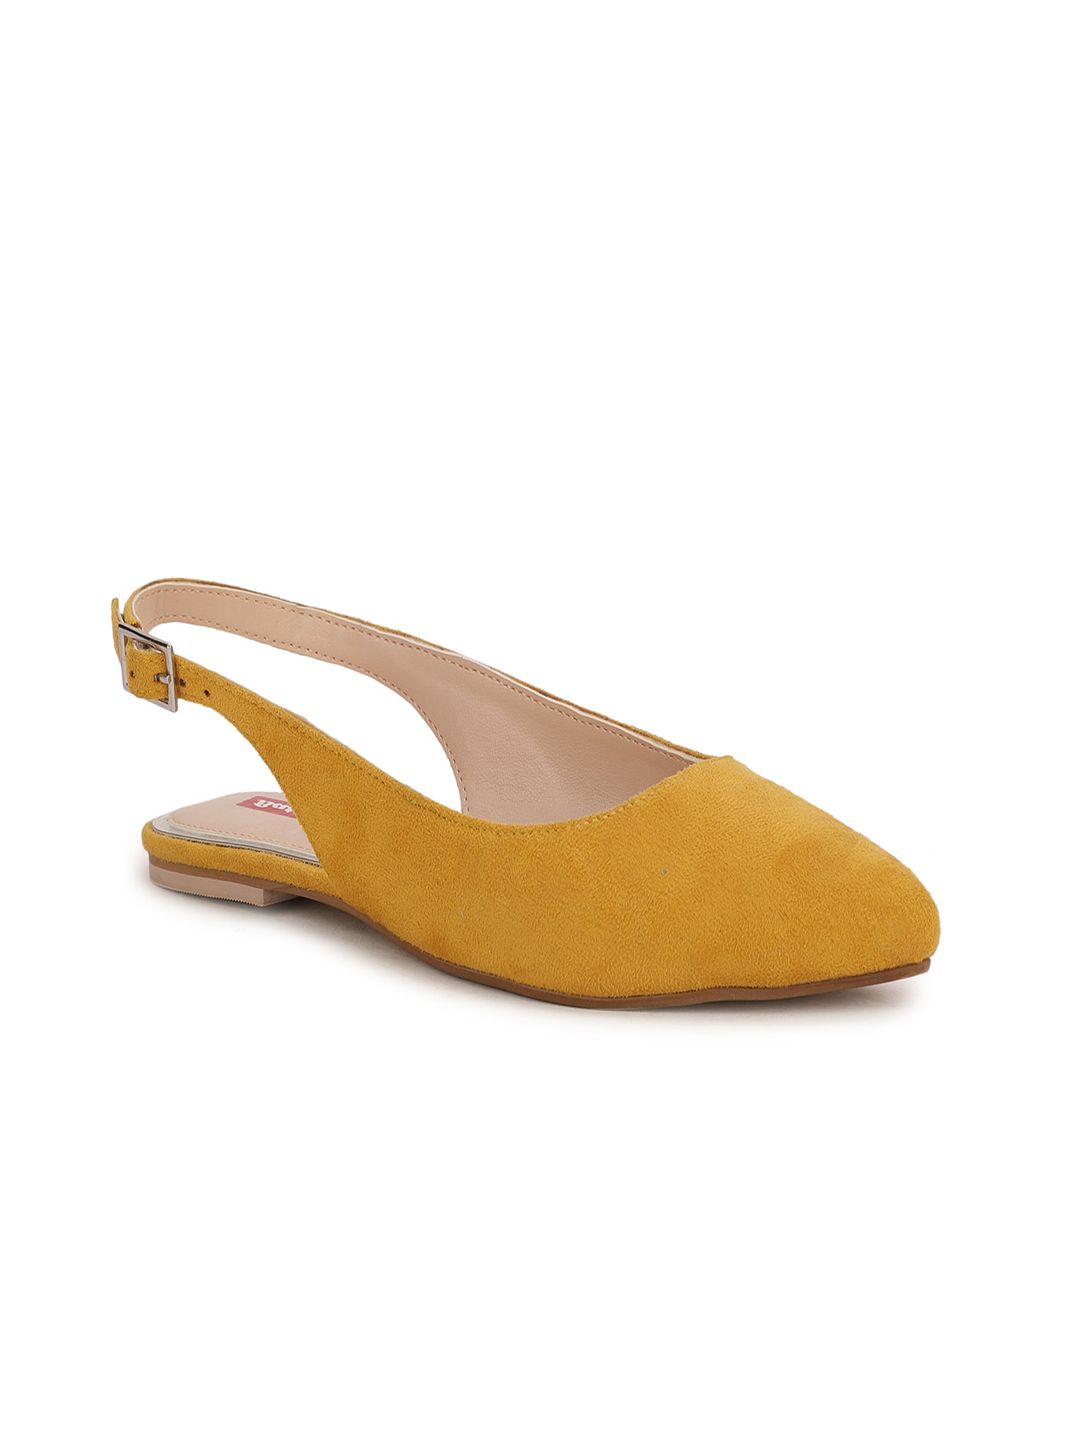 Bata Women Yellow Solid Mules Flats Price in India